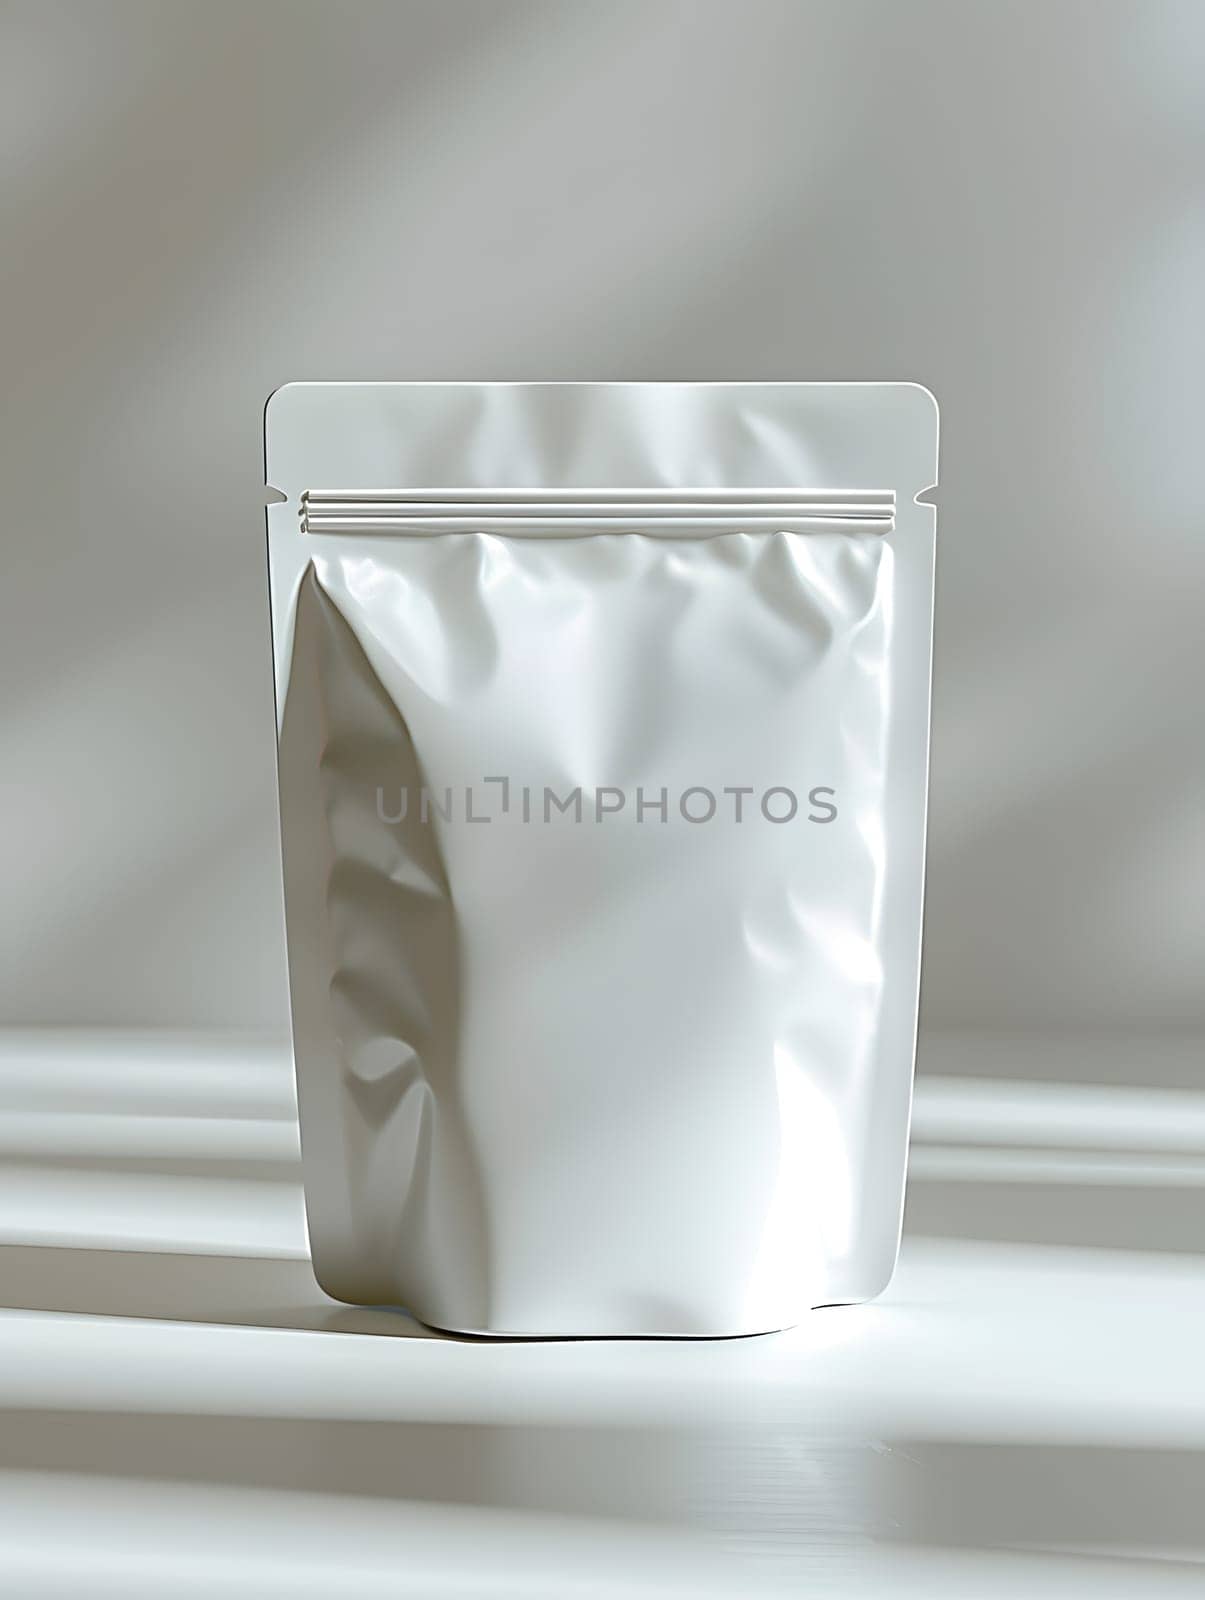 A white plastic bag with a zipper is placed on a table, surrounded by various Drinkware, Tableware, and Serveware items like Cups and Dishes